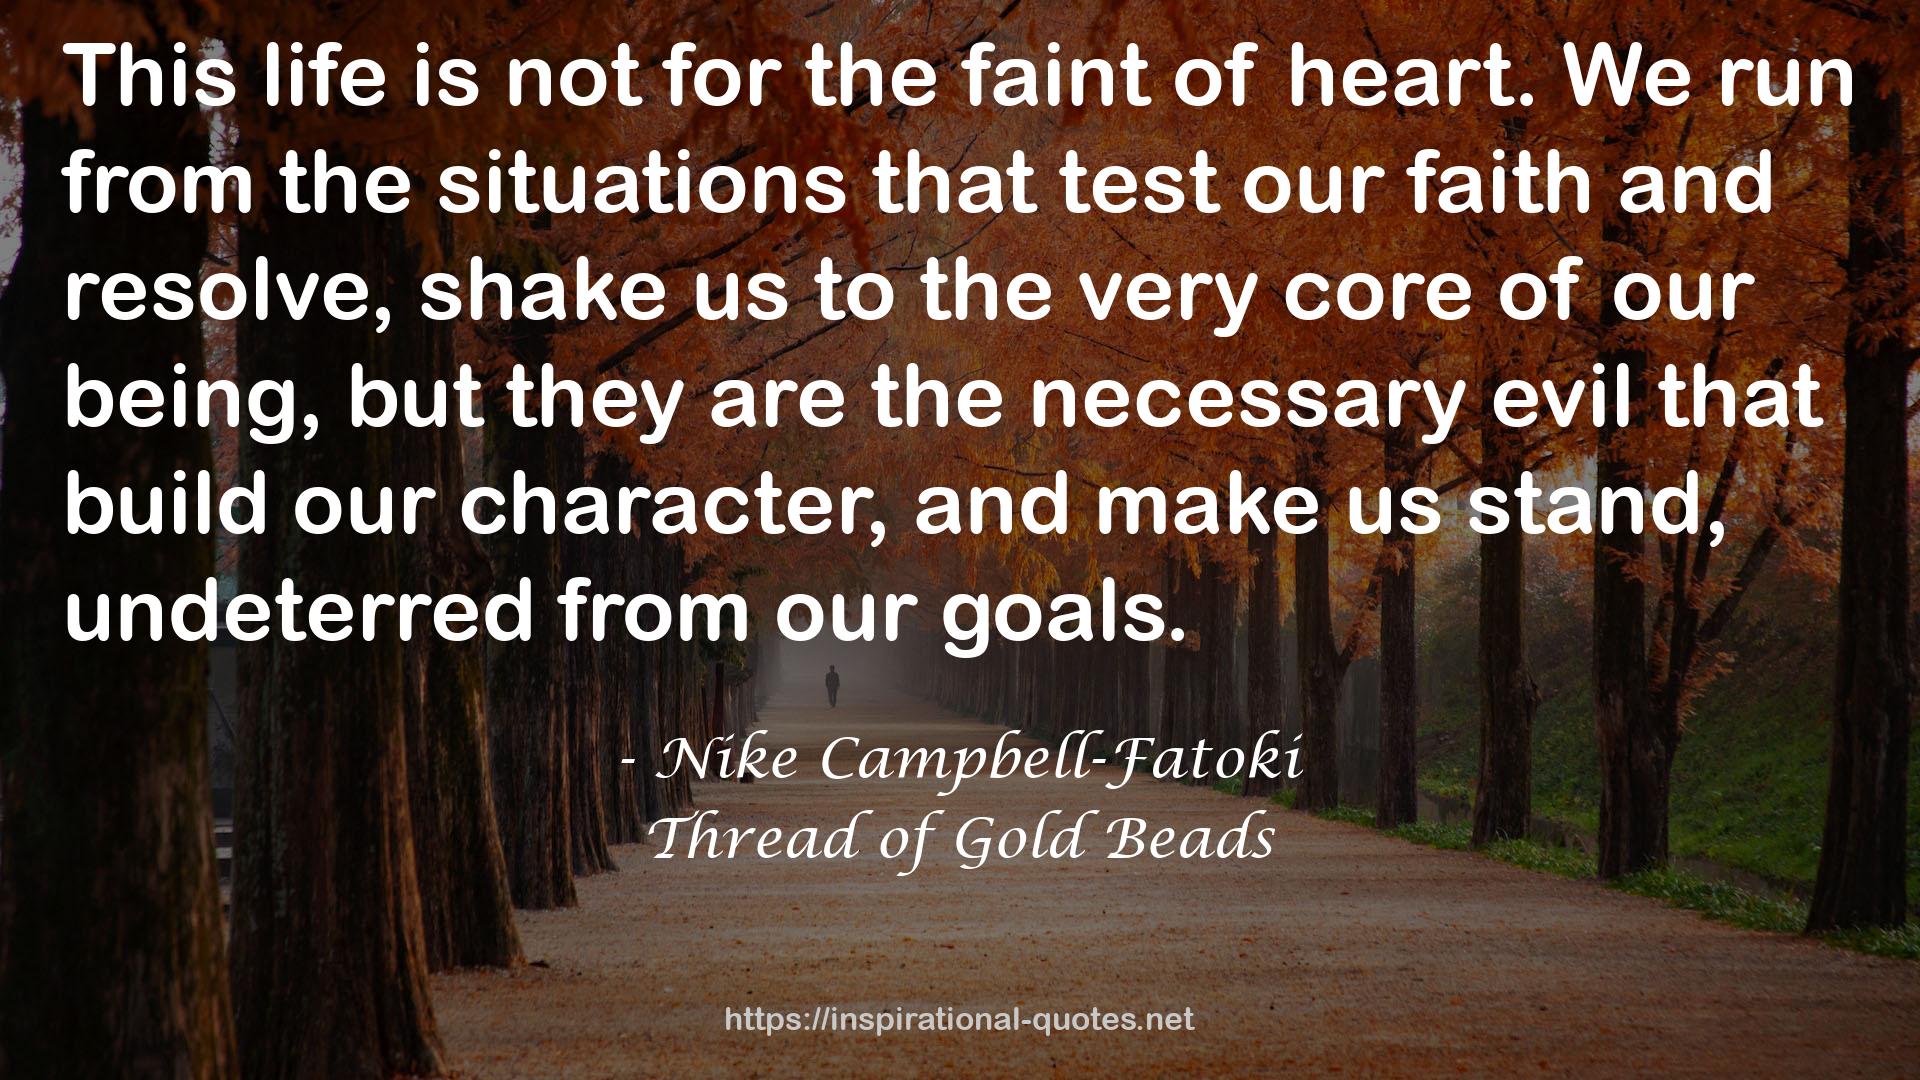 Thread of Gold Beads QUOTES